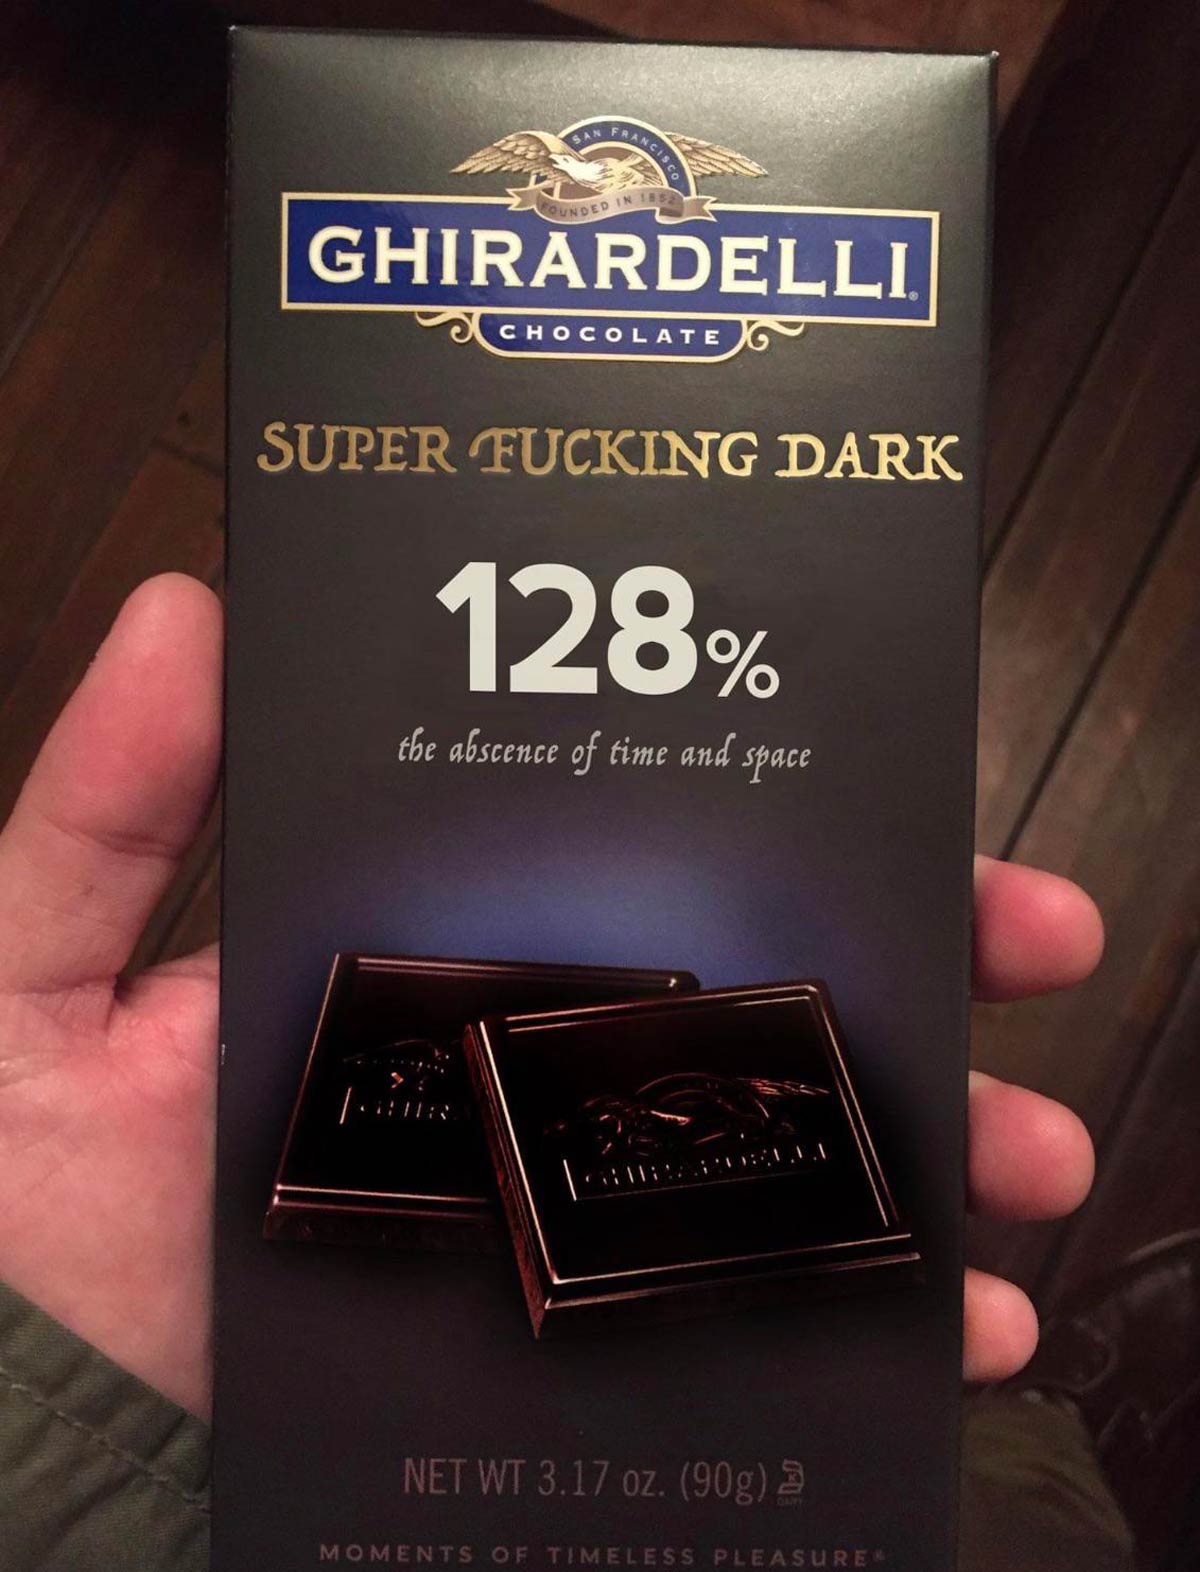 Found this new chocolate bar at the grocery store